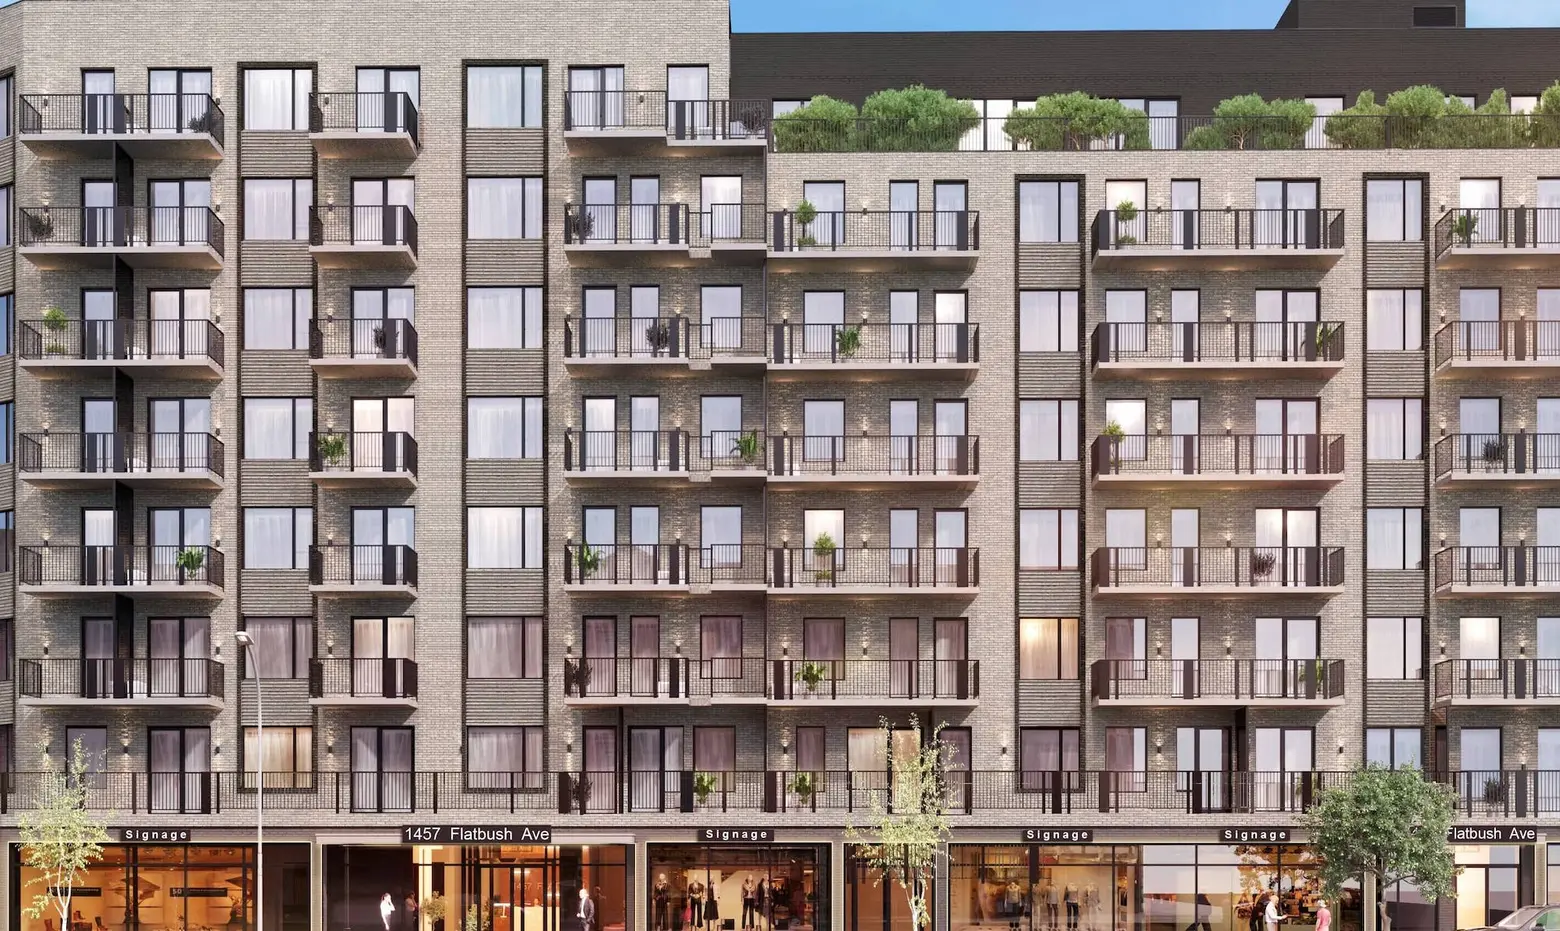 Apply for 22 mixed-income apartments in the heart of Flatbush, from $1,576/month